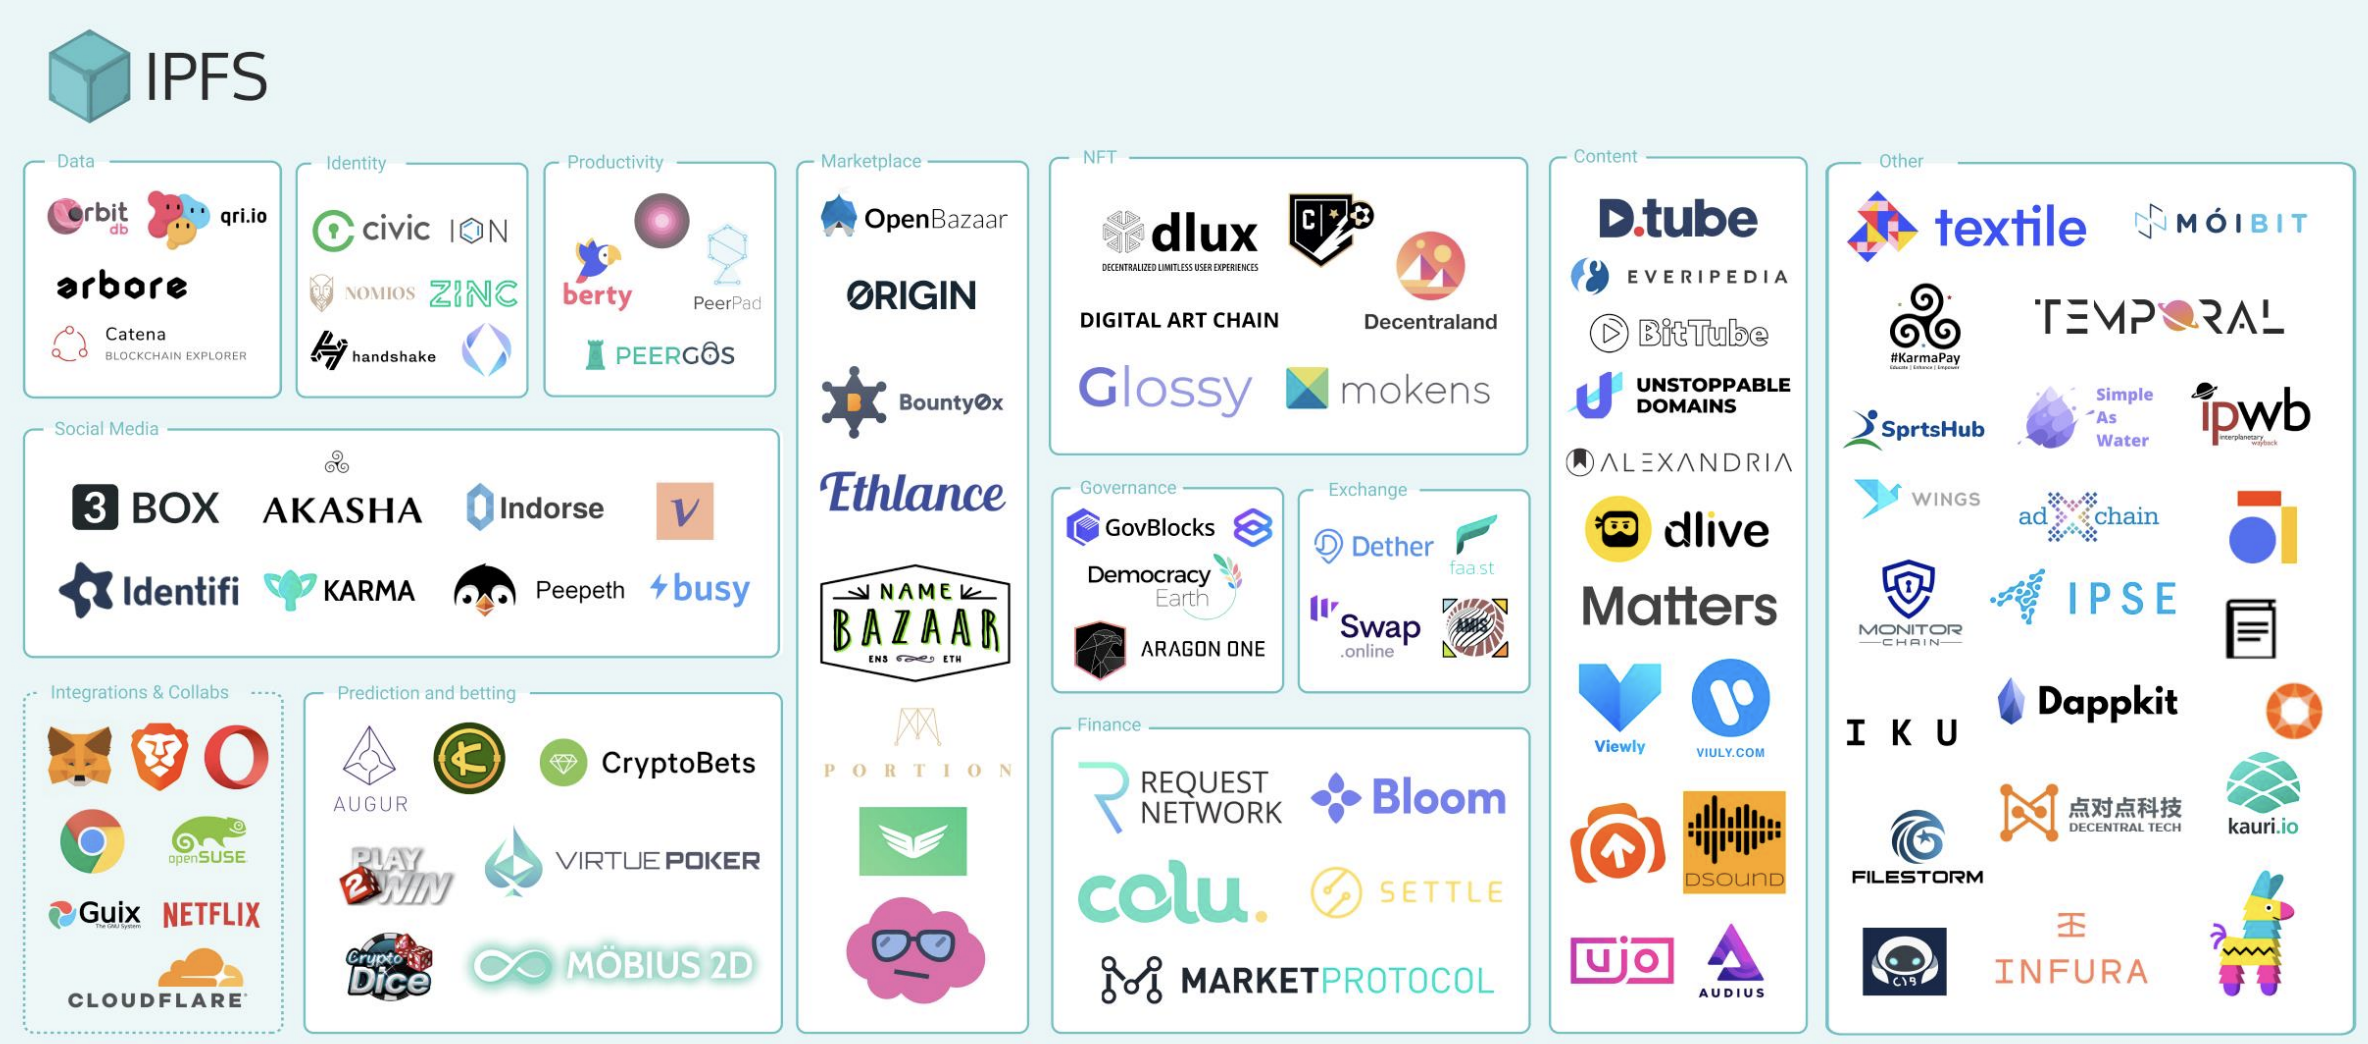 .we end with a pic of the IPFS dweb ecosystem.